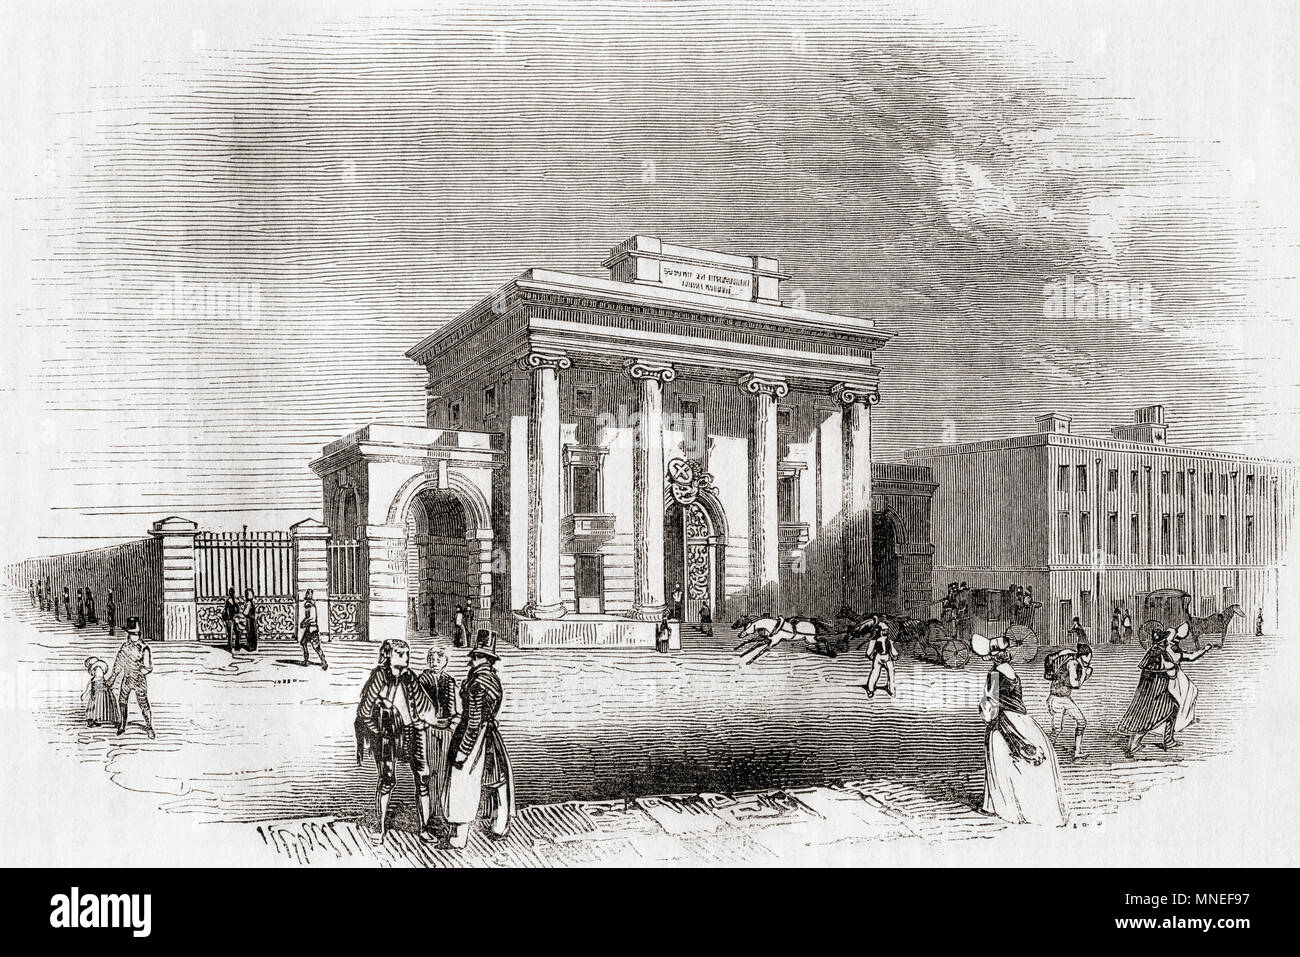 Birmingham Curzon Street railway station (formerly Birmingham station), Birmingham, England in the 19th century.  From Old England: A Pictorial Museum, published 1847. Stock Photo